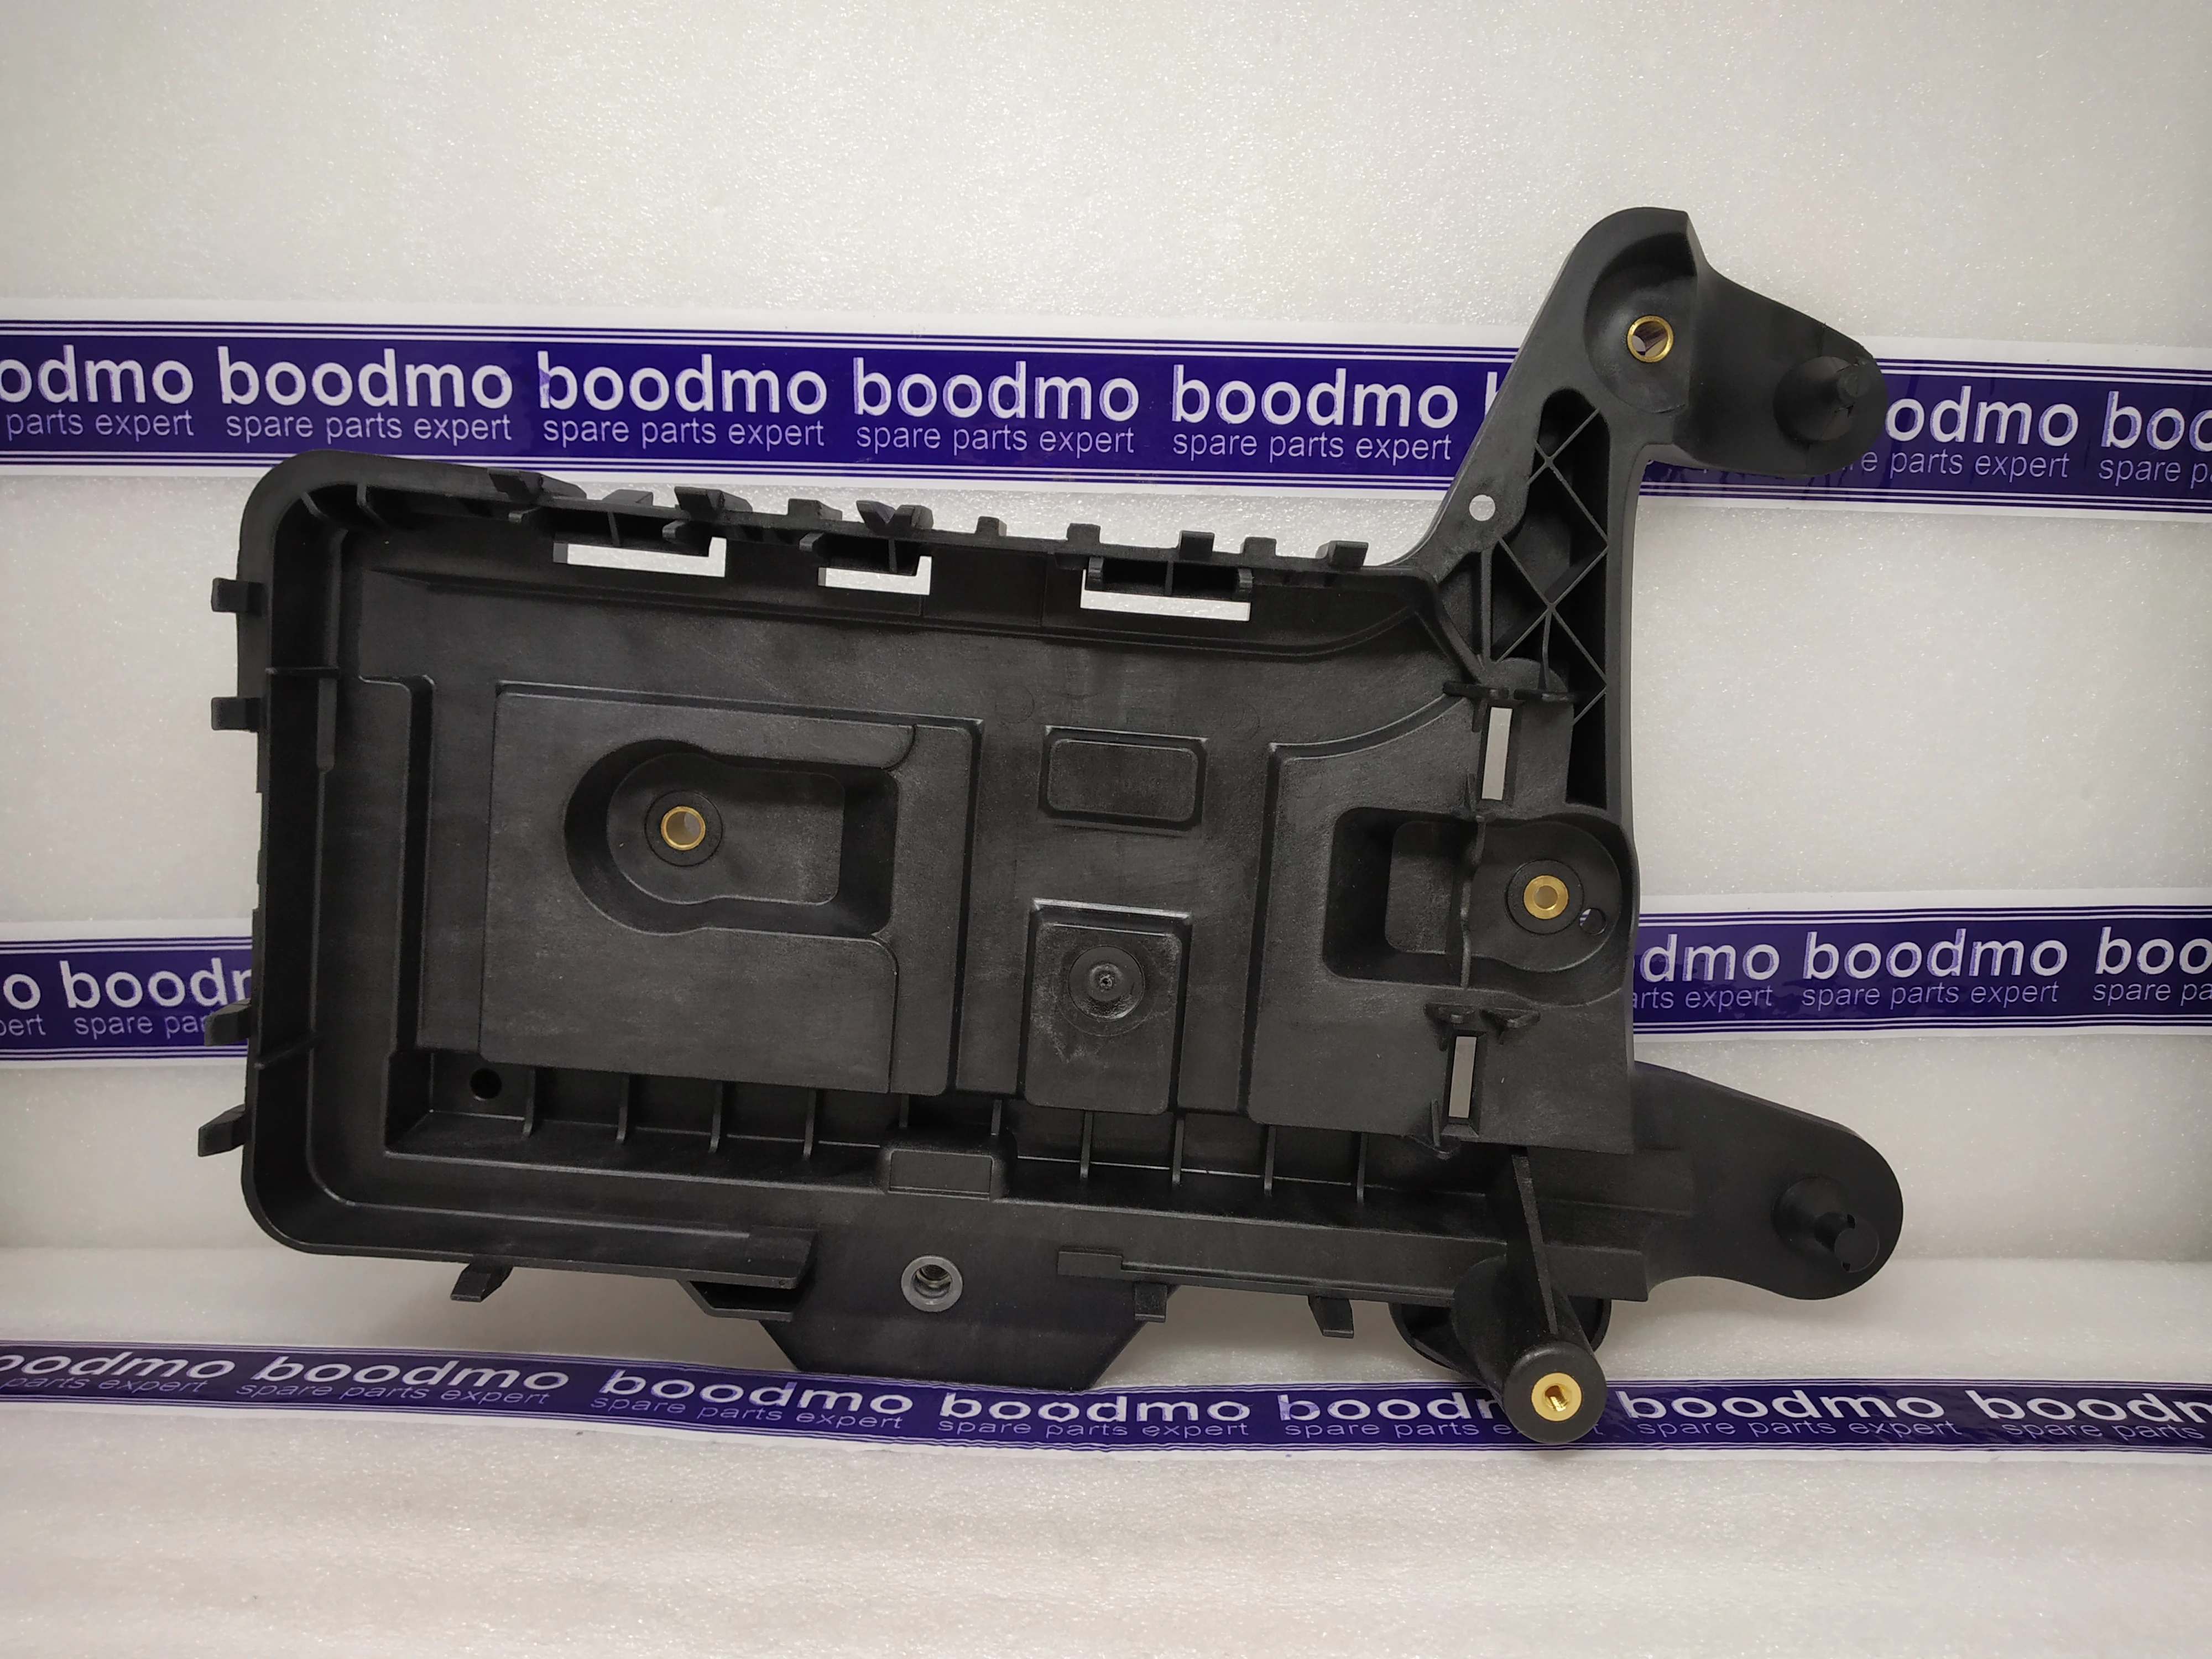 BATTERY TRAY: VAG (VW, AUDI, SKODA) 1K0333H -compatibility, features,  prices. boodmo